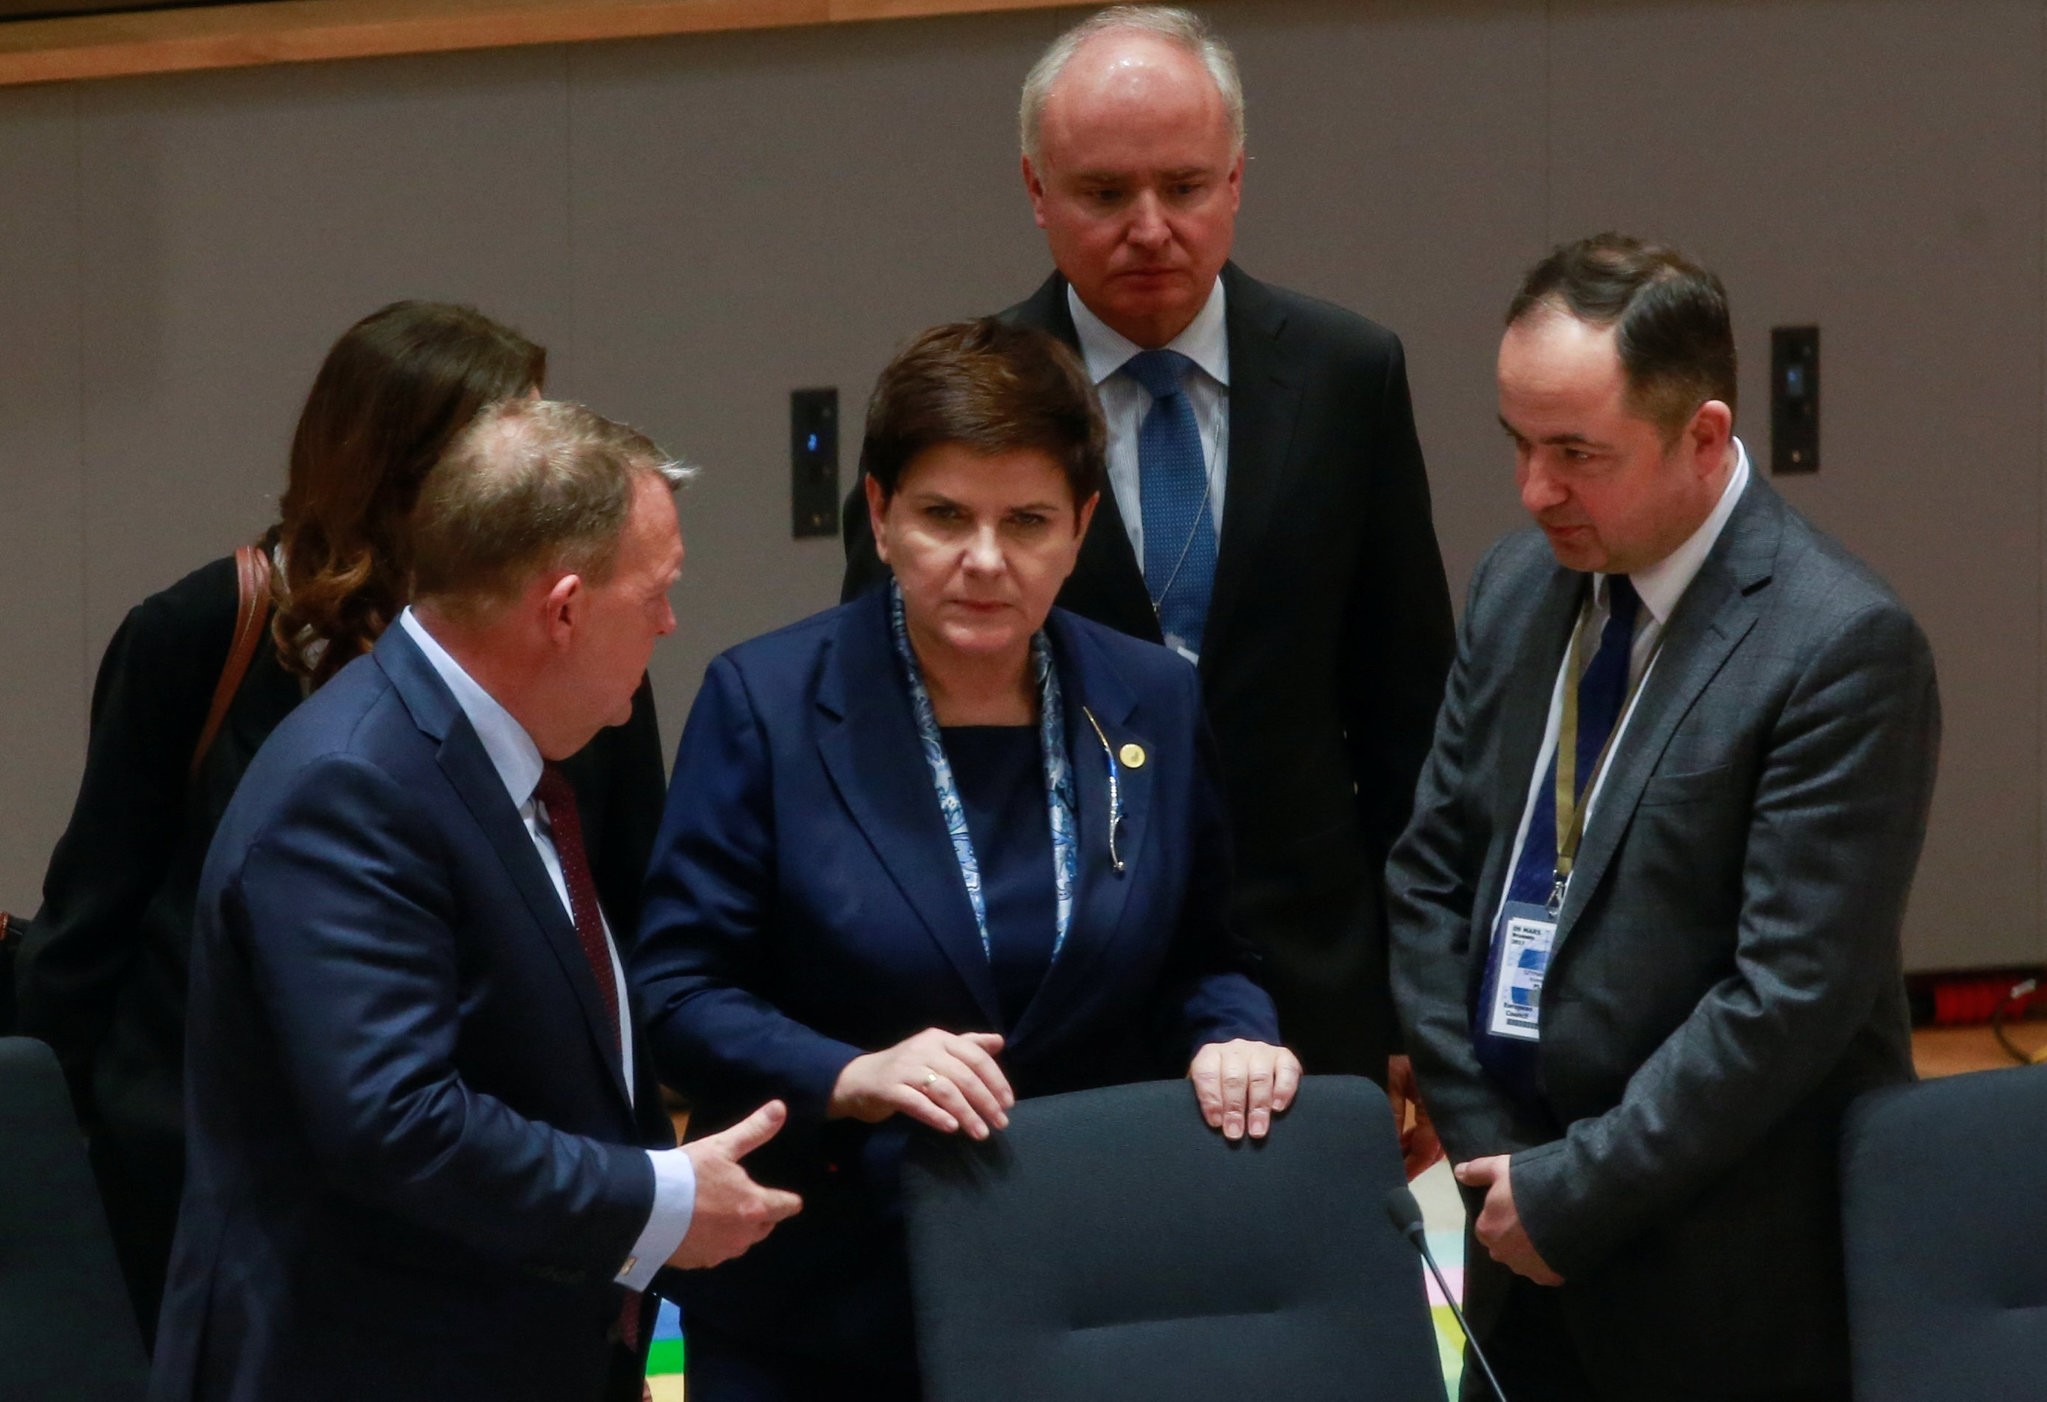 Denmark's Prime Minister Lars Lokke Rasmussen (L) talks with Poland's Prime Minister Beata Szydlo (C) during a European Union summit in Brussels, Belgium, March 9, 2017. (REUTERS Photo)